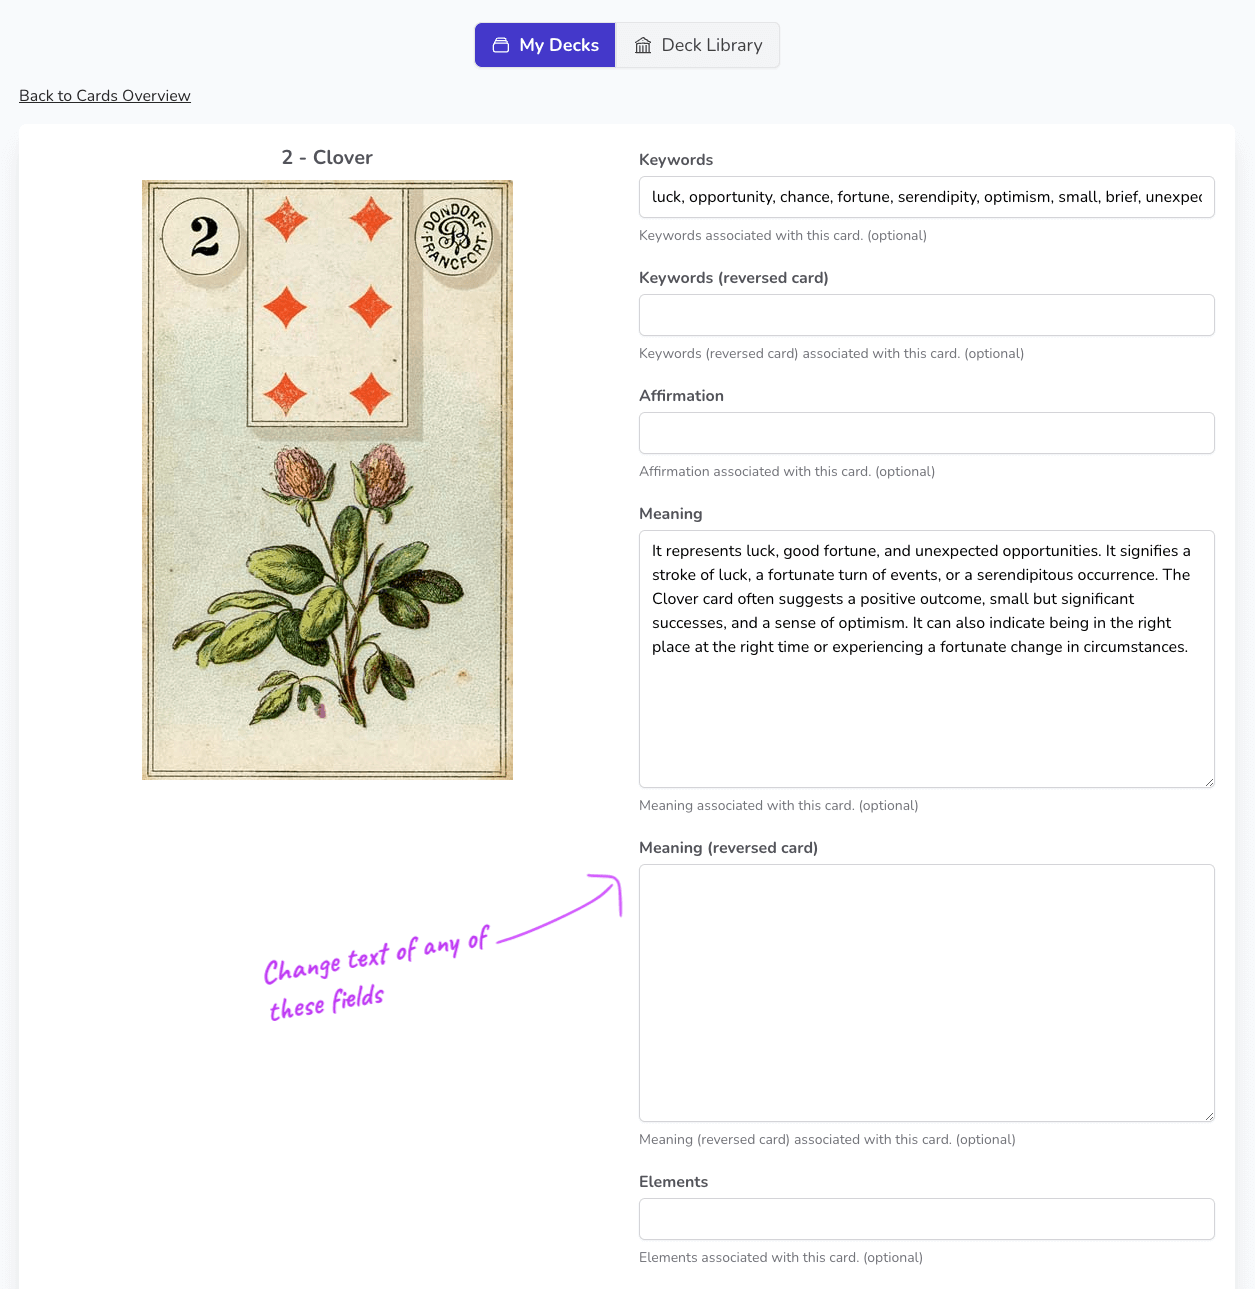 Card meanings - change them when you need to